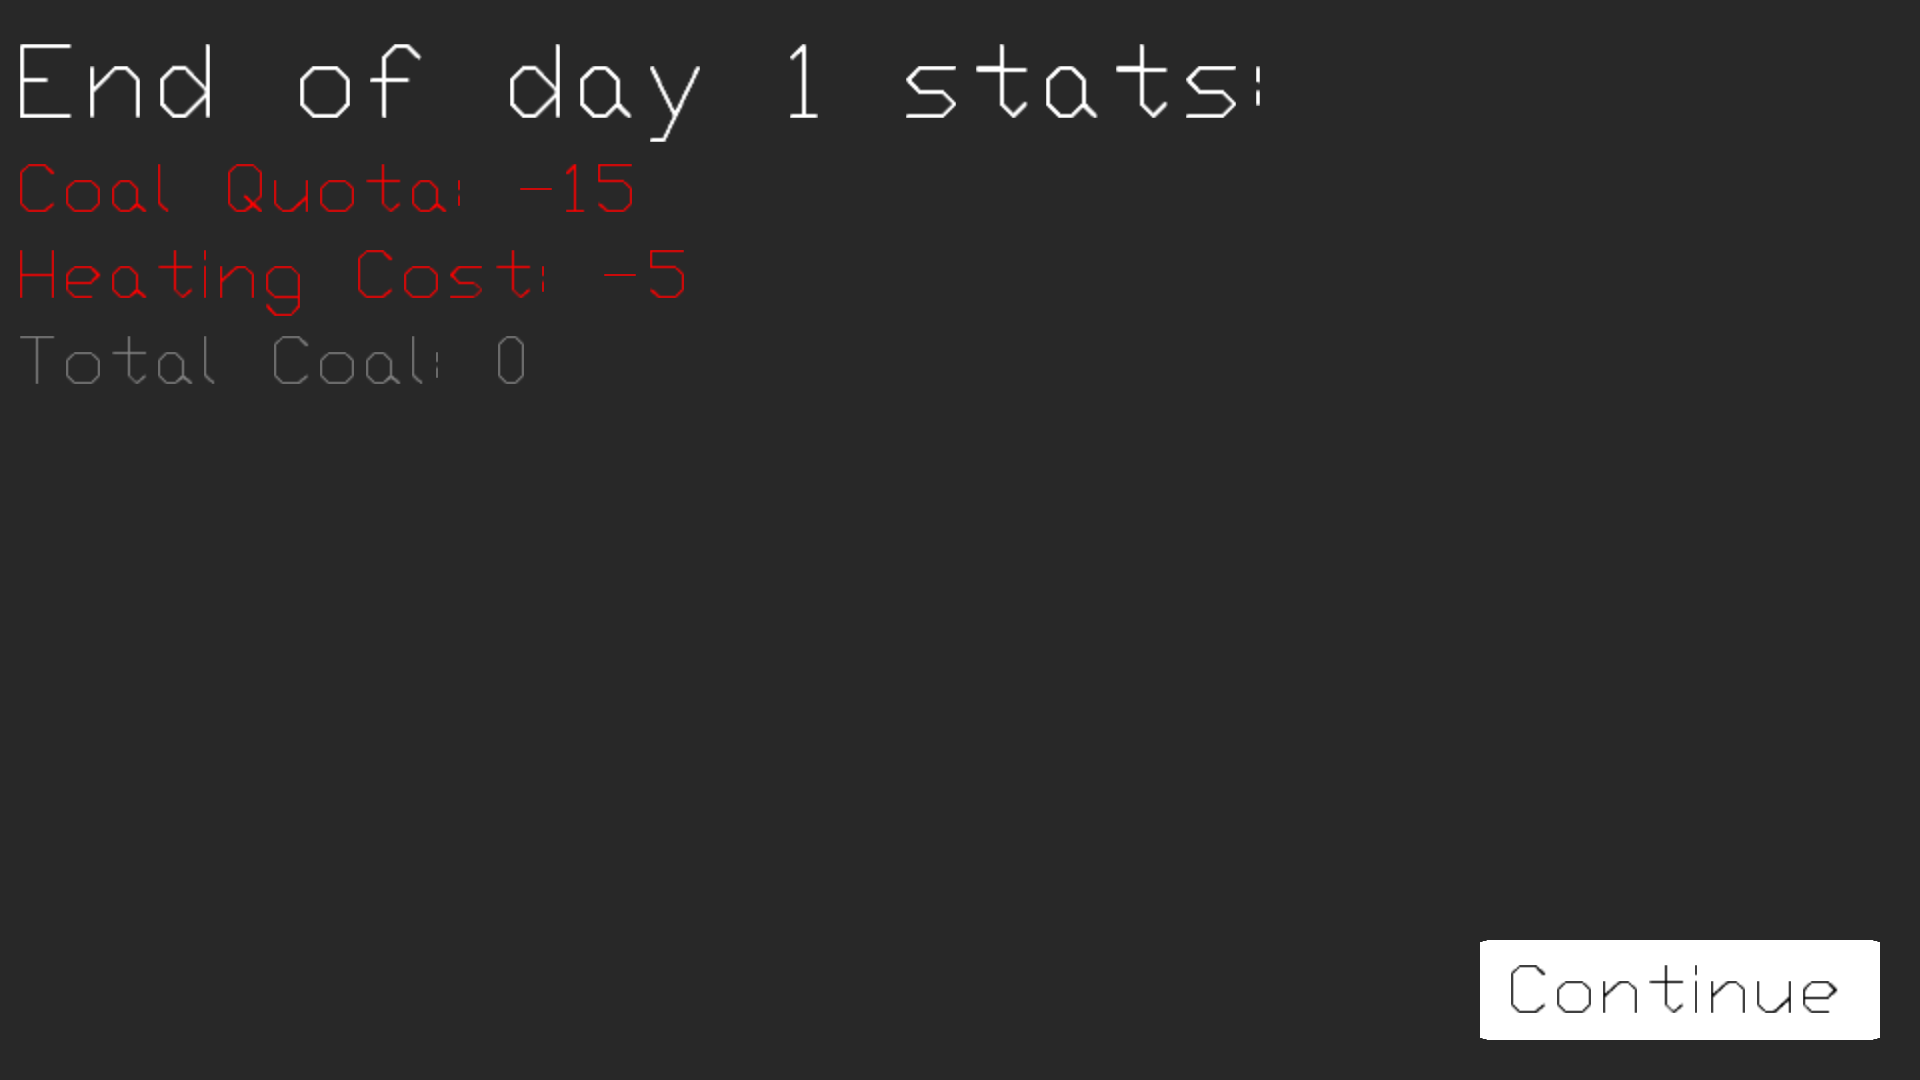 An image of the end of day stats screen.